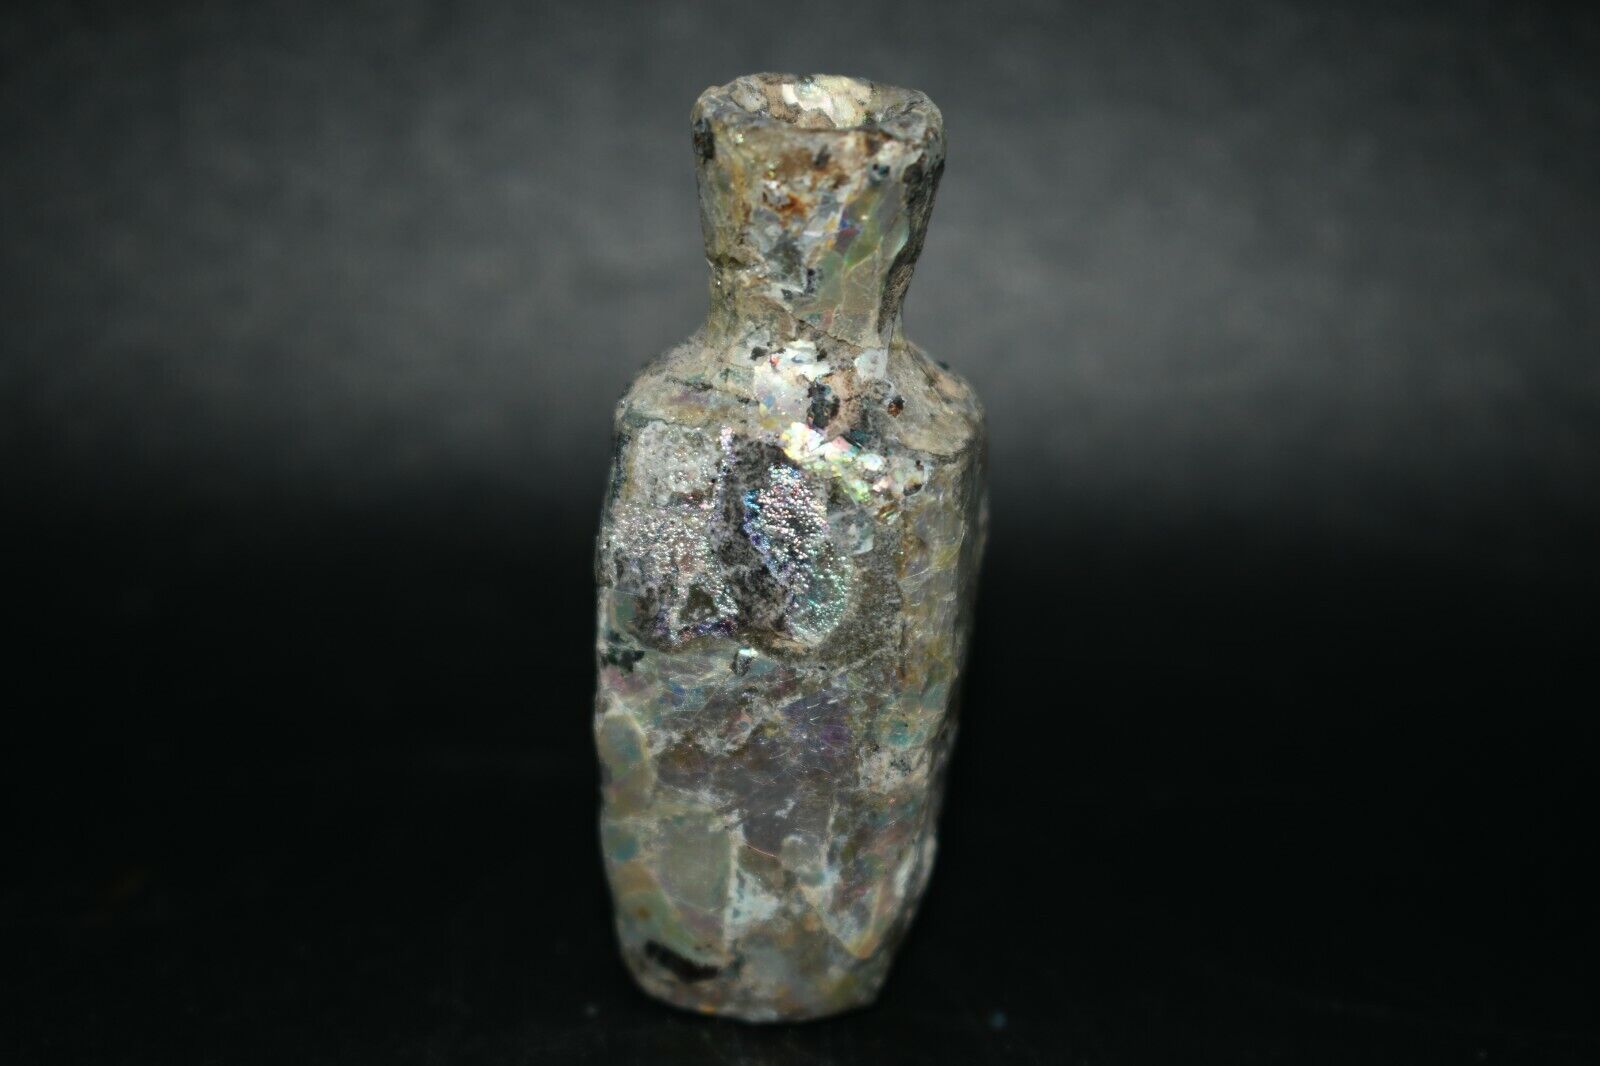 Wonderful Ancient Roman Glass Bottle with Iridescent Patina from Israel